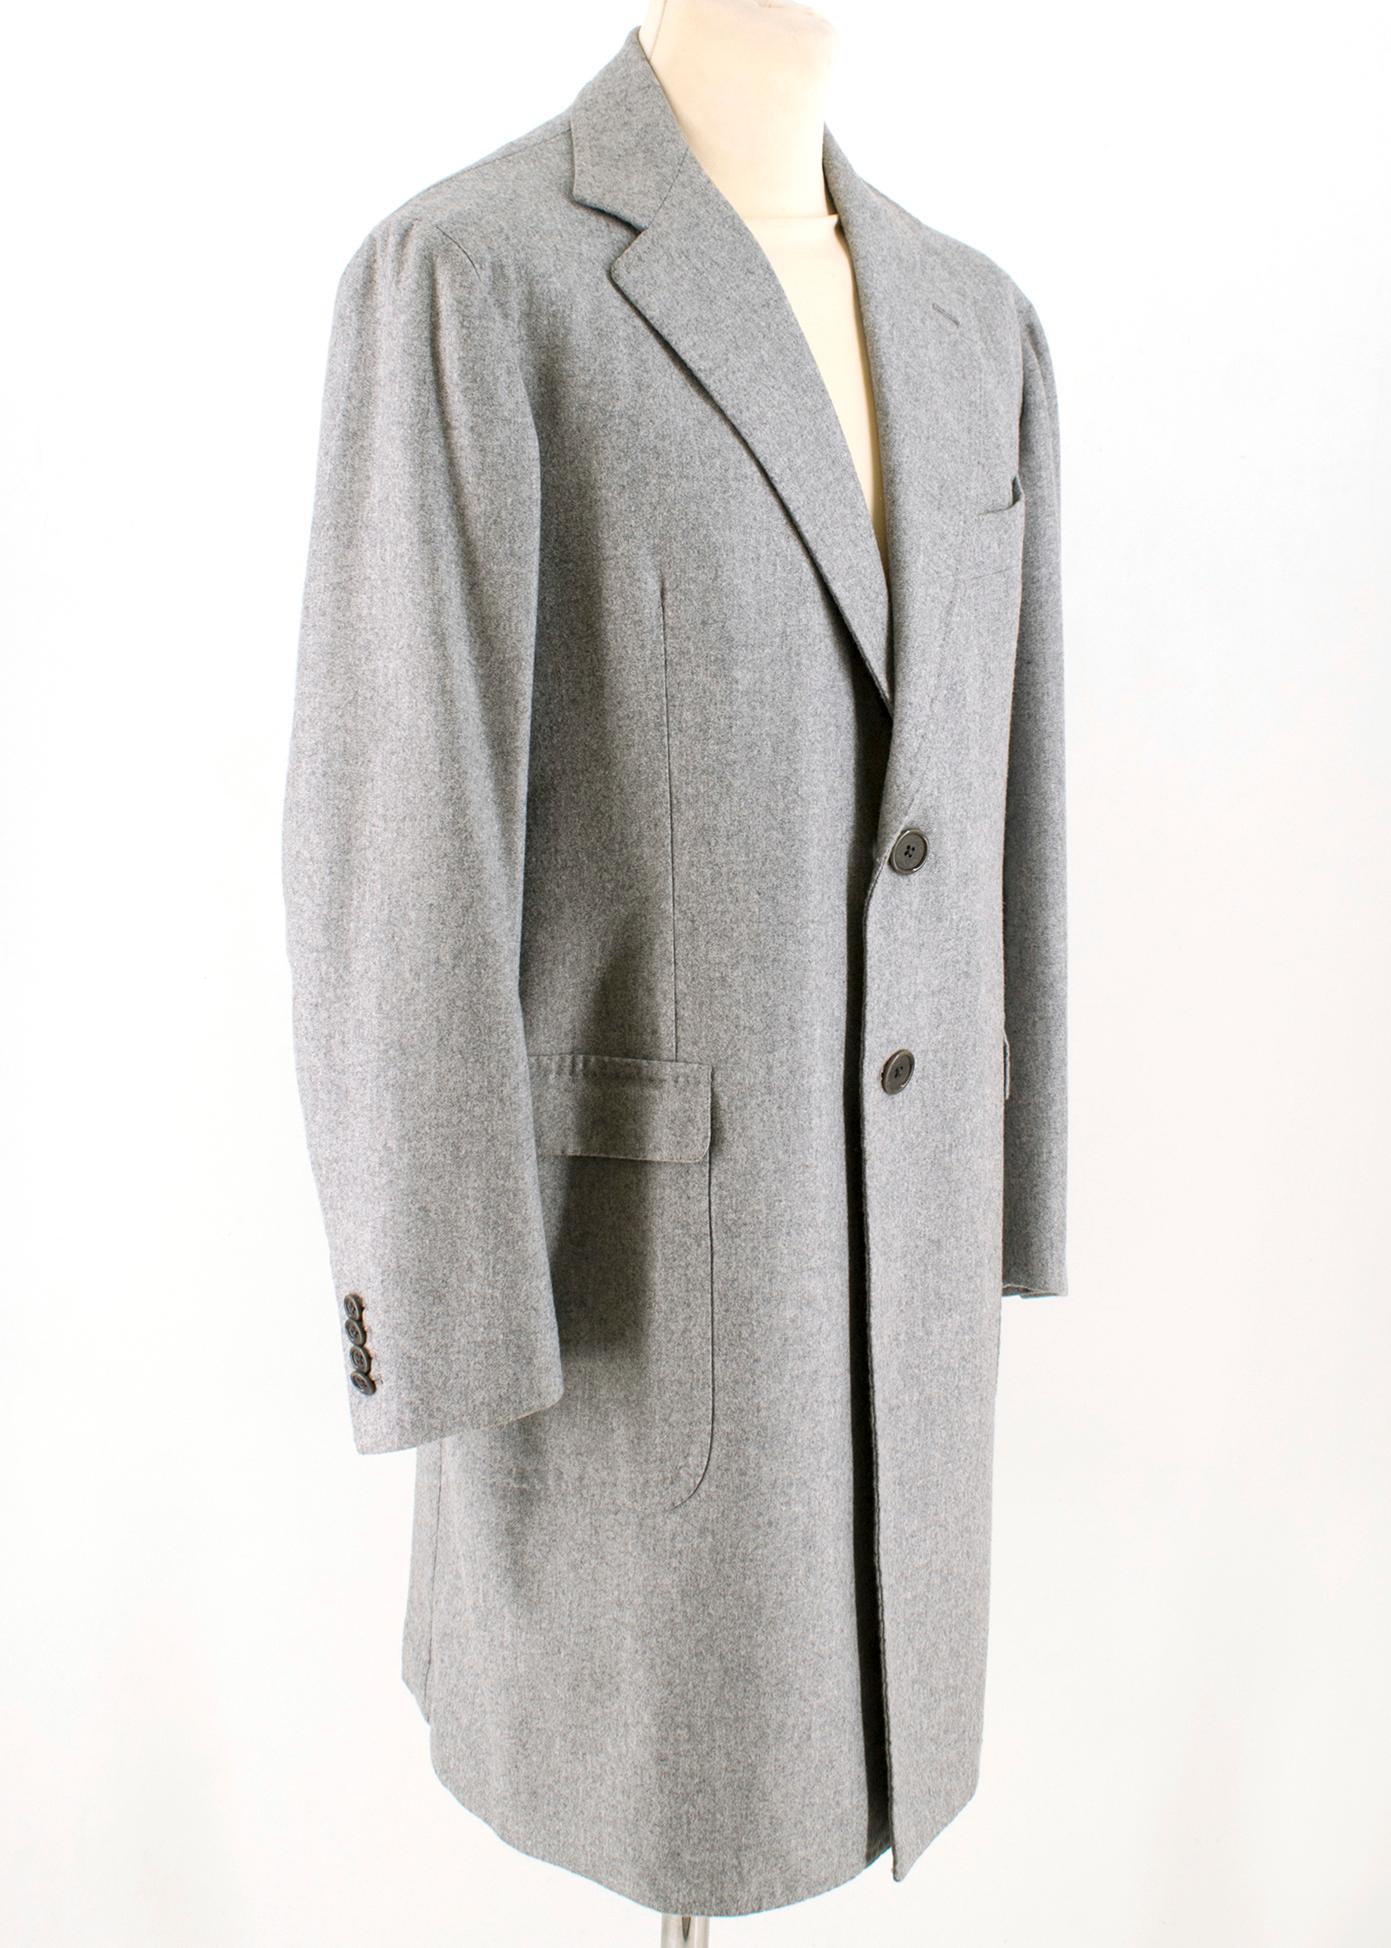 Gennano Solito High-quality luxurious Grey Long Coat

- Luxurious long Cashmere coat finely hand-made in Italy
- Light-weight coat with two front pockets (one on each side)
- Soft inside pockets with hand-stitched embroidery on the right side if the